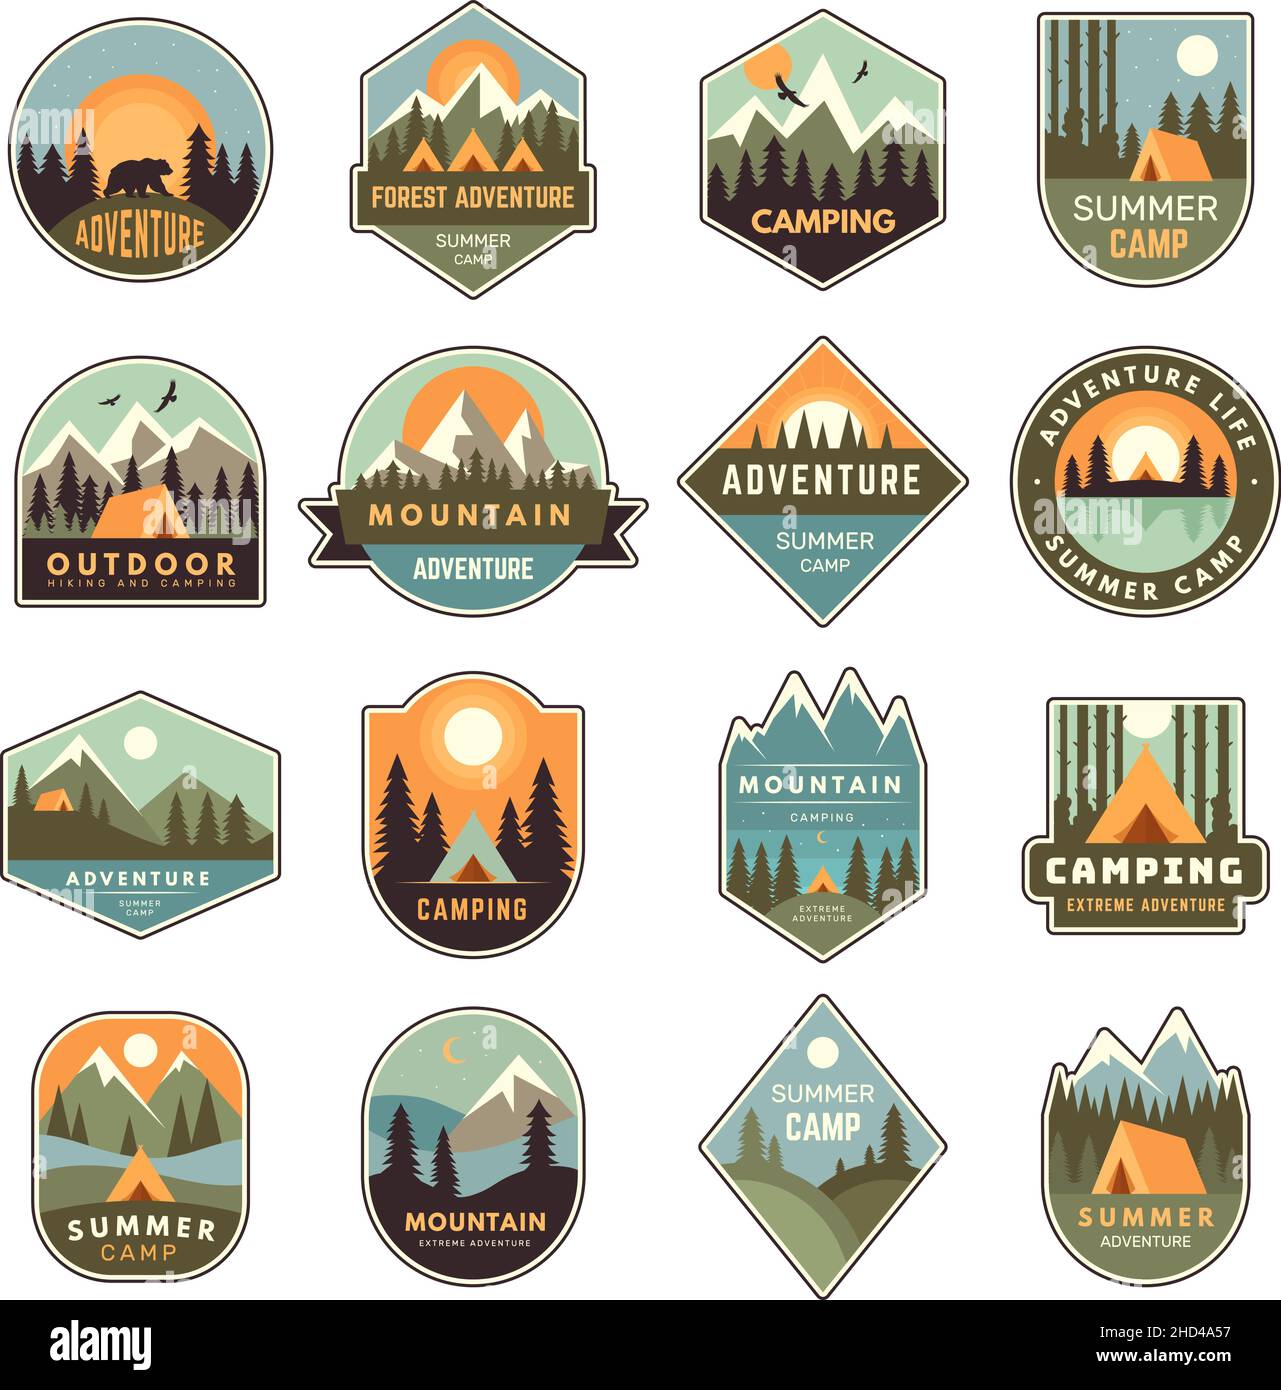 Summer camp badges. Mountain exploring labels outdoor adventure of scout in forest nature emblem recent vector templates set isolated Stock Vector